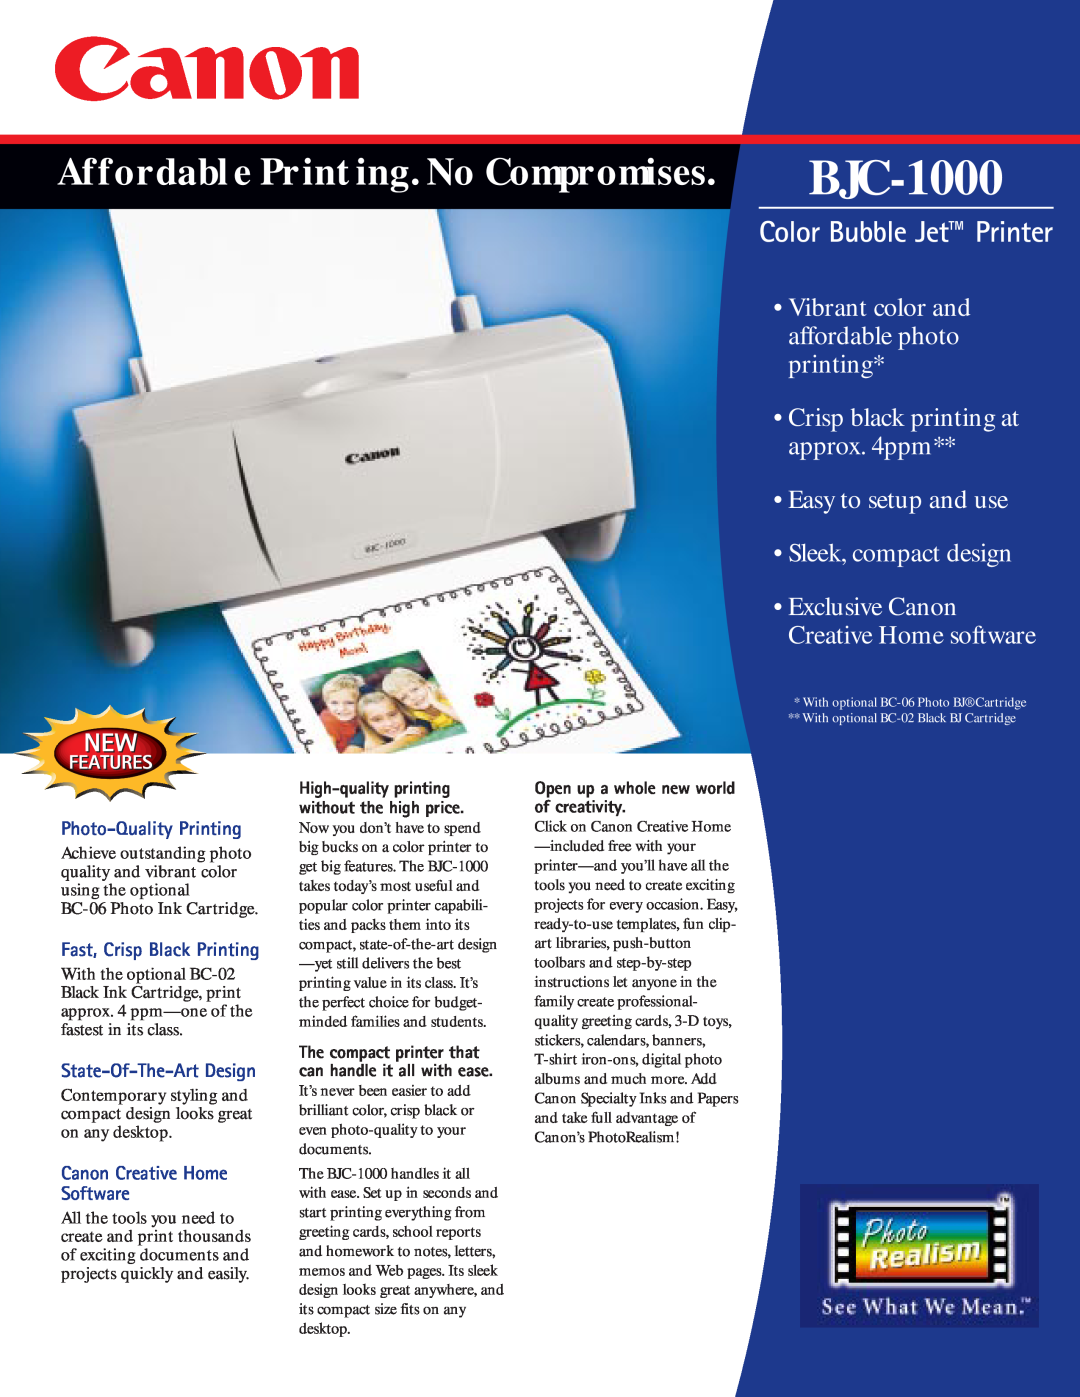 Canon BJC-1000 manual Affordable Printing. No Compromises, Vibrant color and, affordable photo, printing, approx. 4ppm 